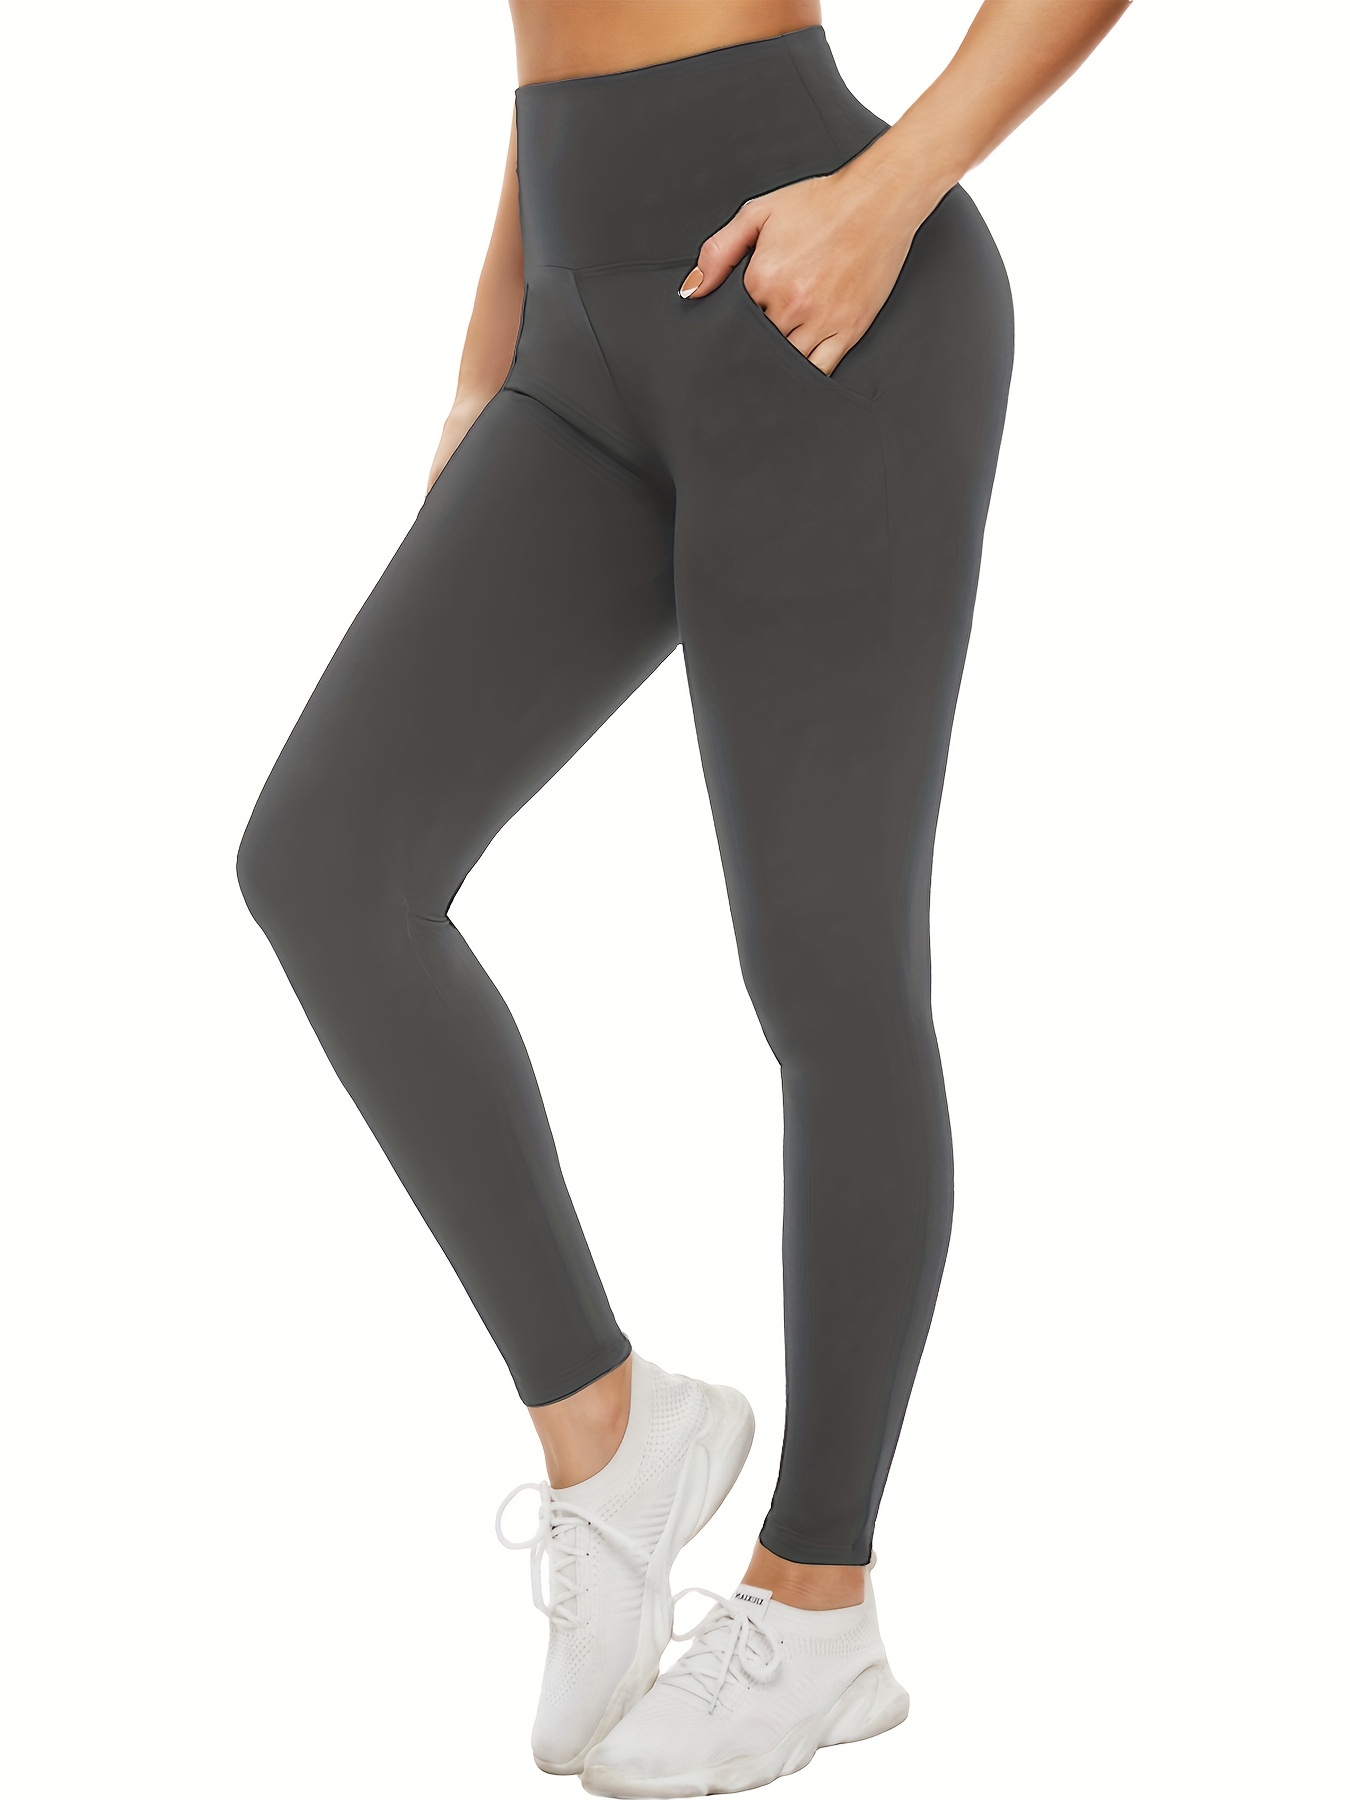 Leggings with Pockets for Women, High Waisted Tummy Control